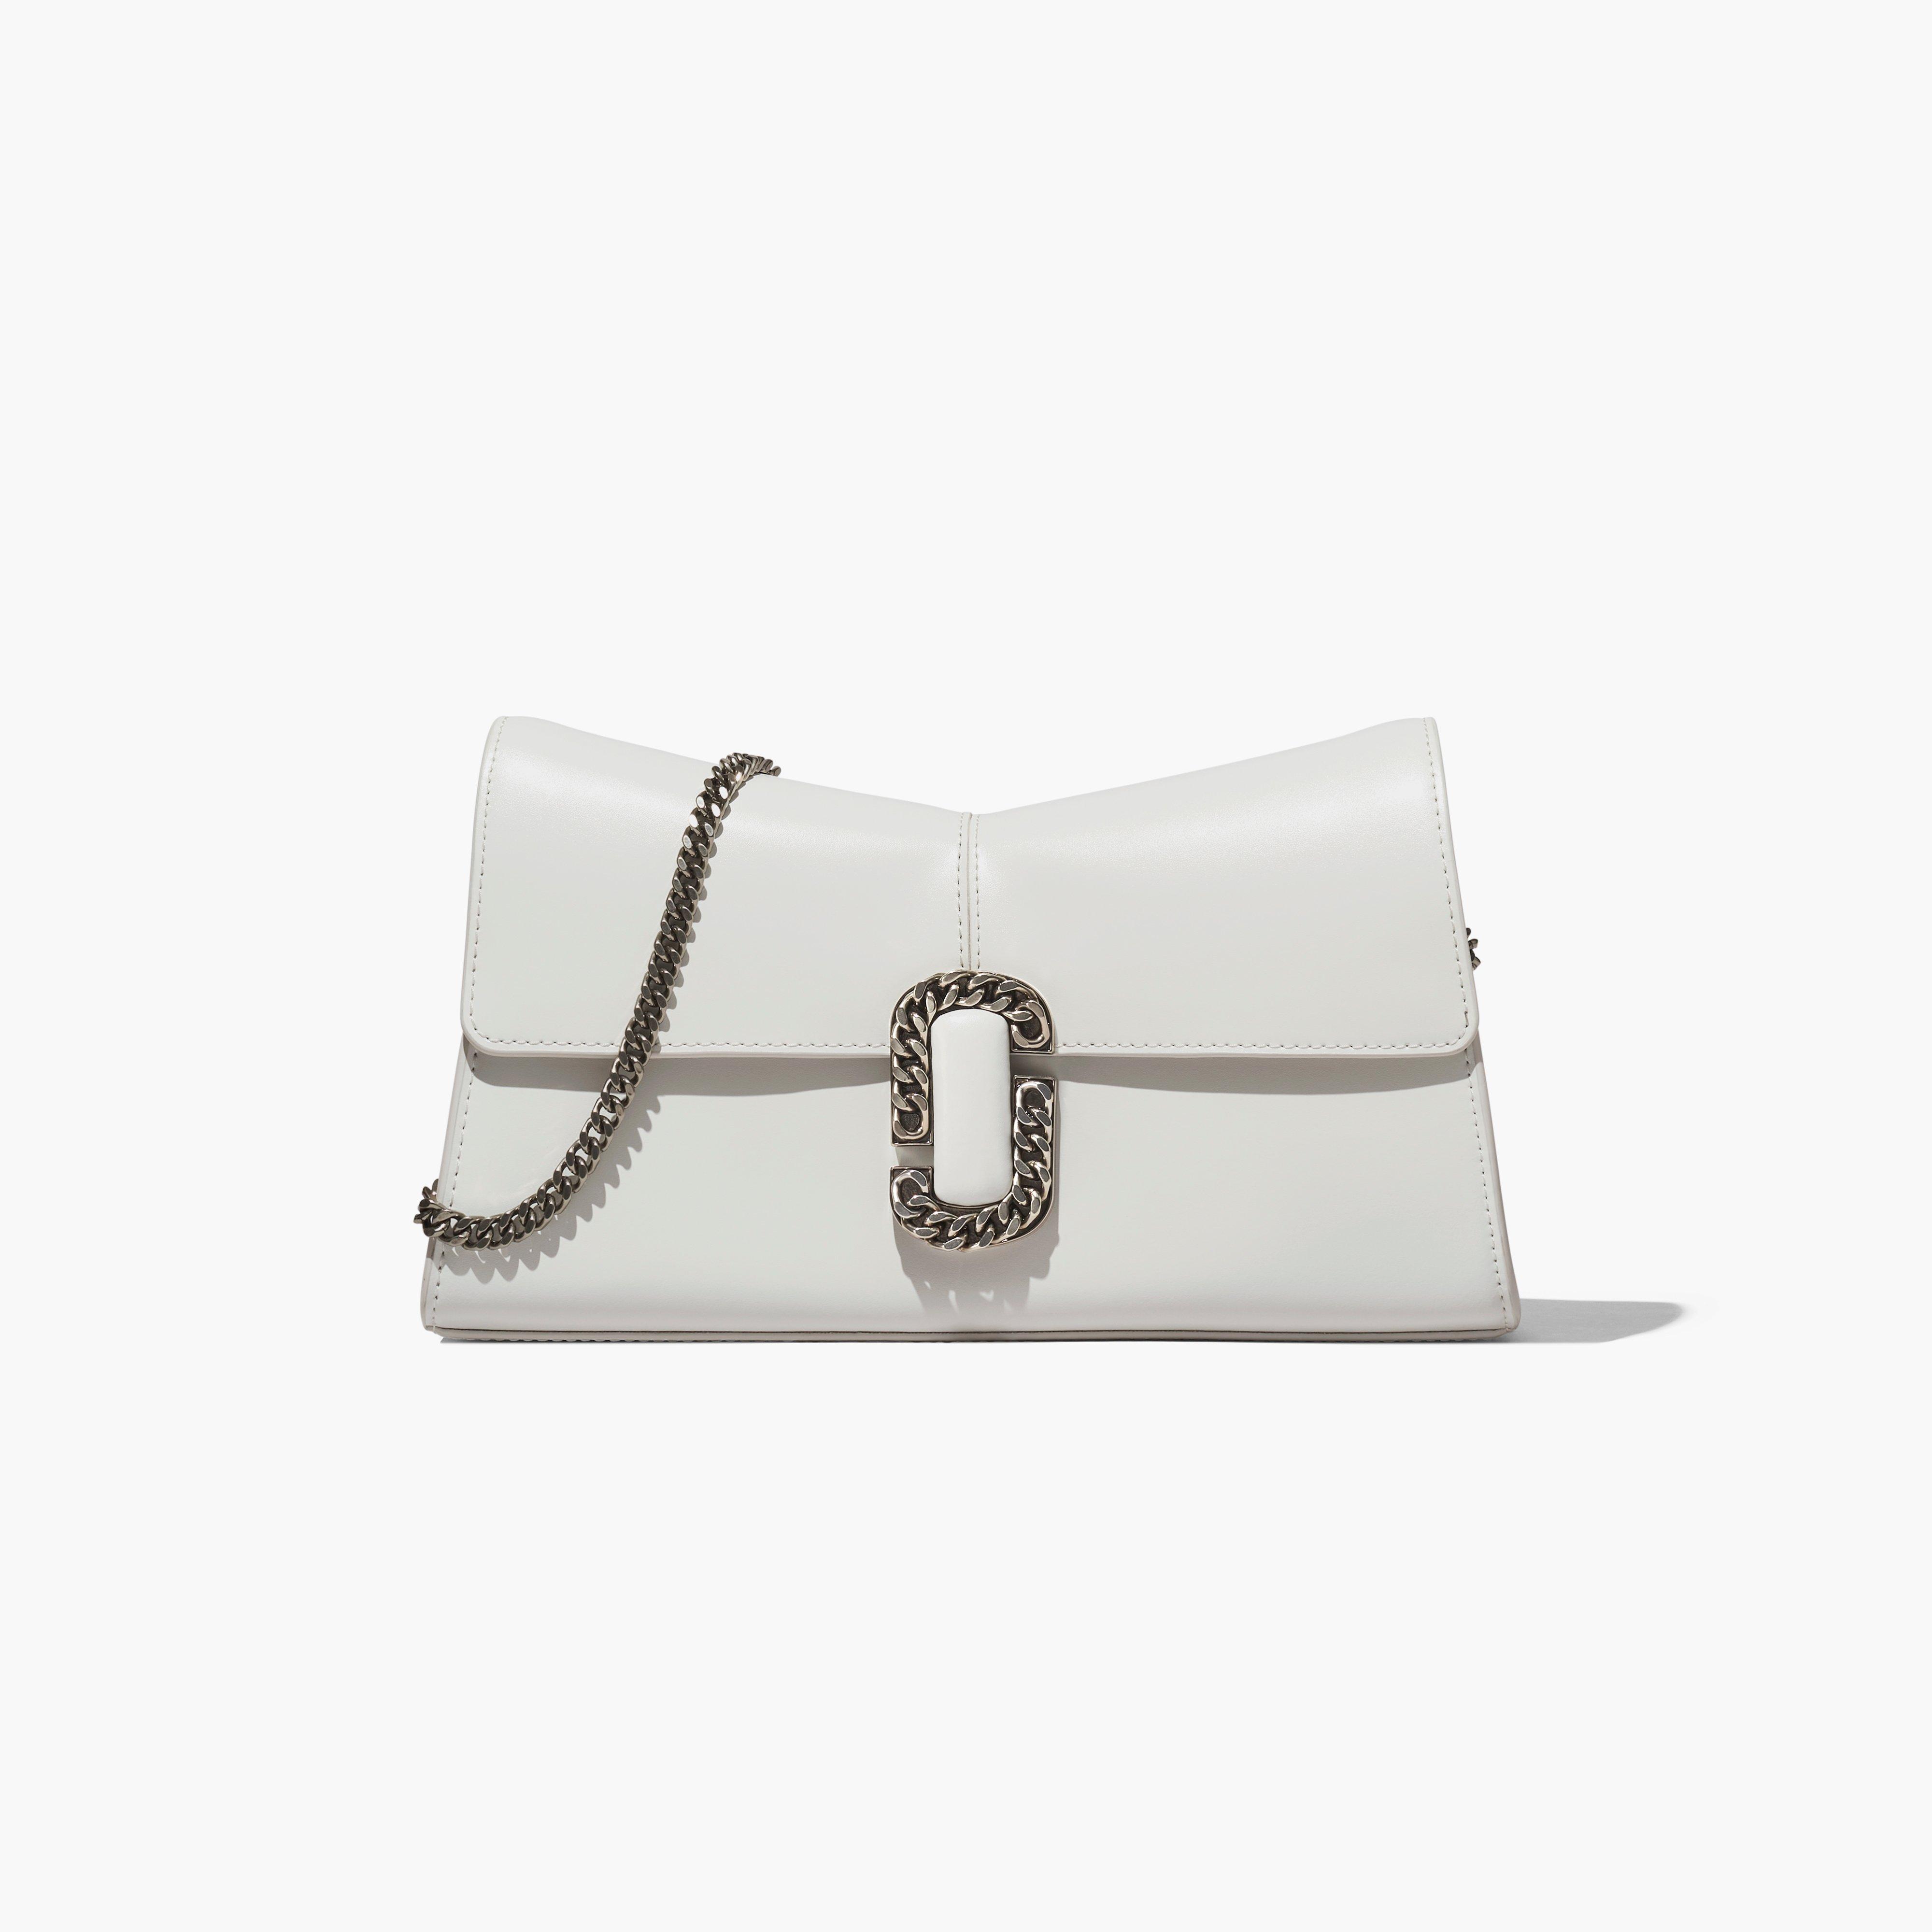 Marc by Marc jacobs The St. Marc Convertible Clutch,WHITE